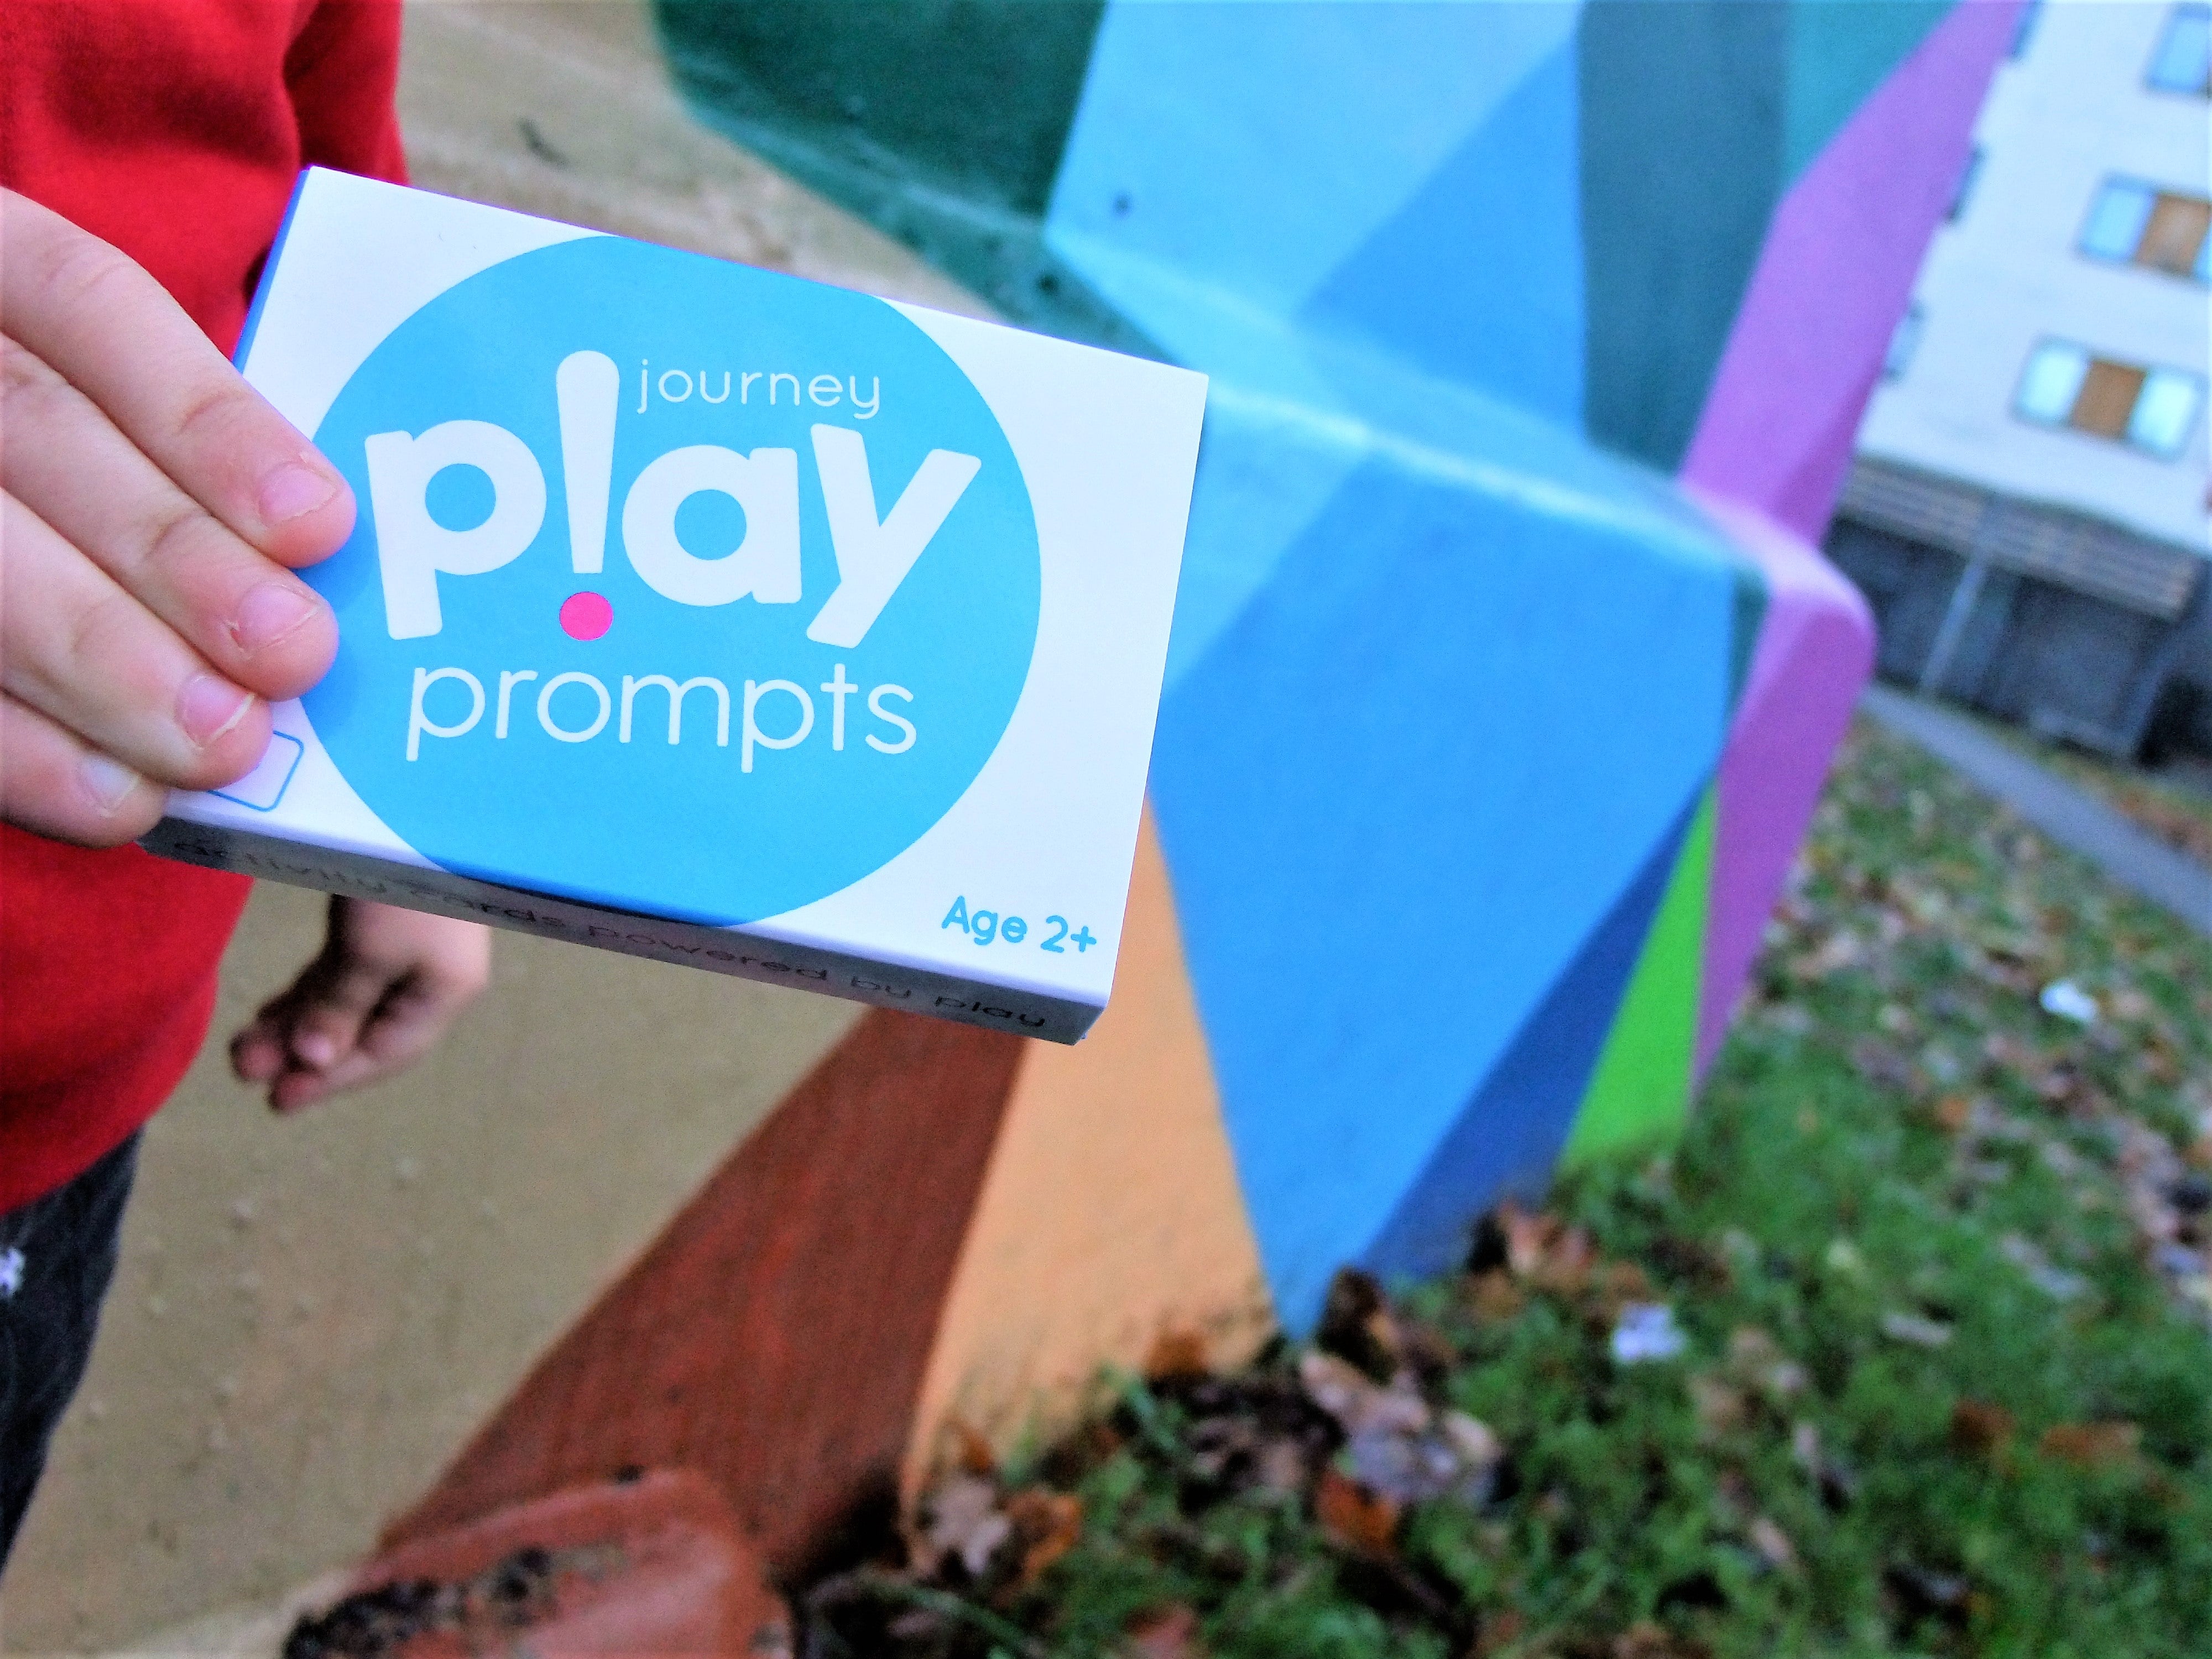 journey playPROMPTS for kids aged 3+ - playHOORAY!